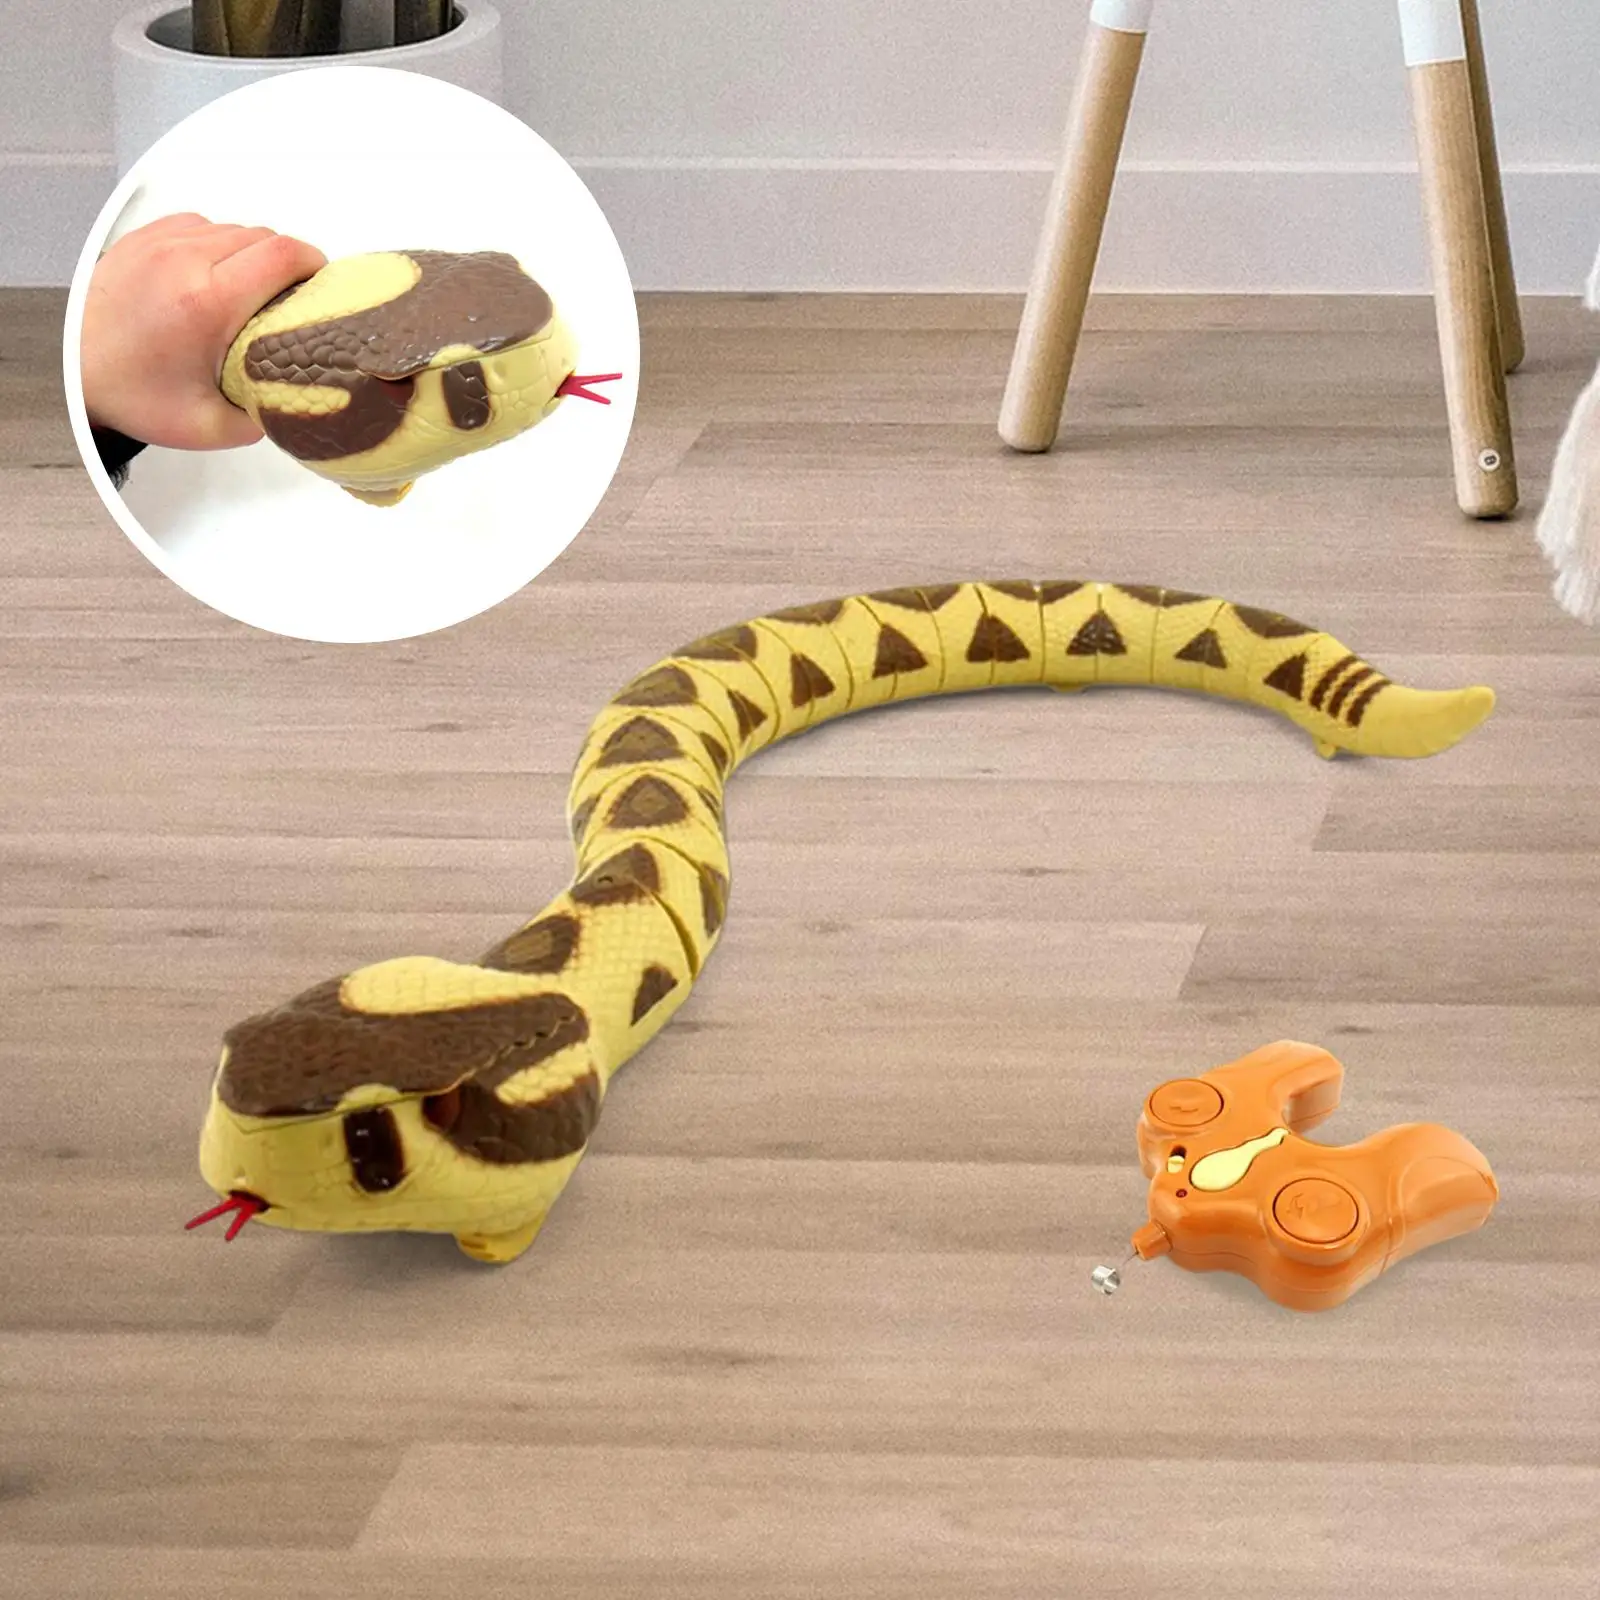 Lifelike RC Snake Toys Scary Snake Toy Artifical Snake Model for Party Gifts